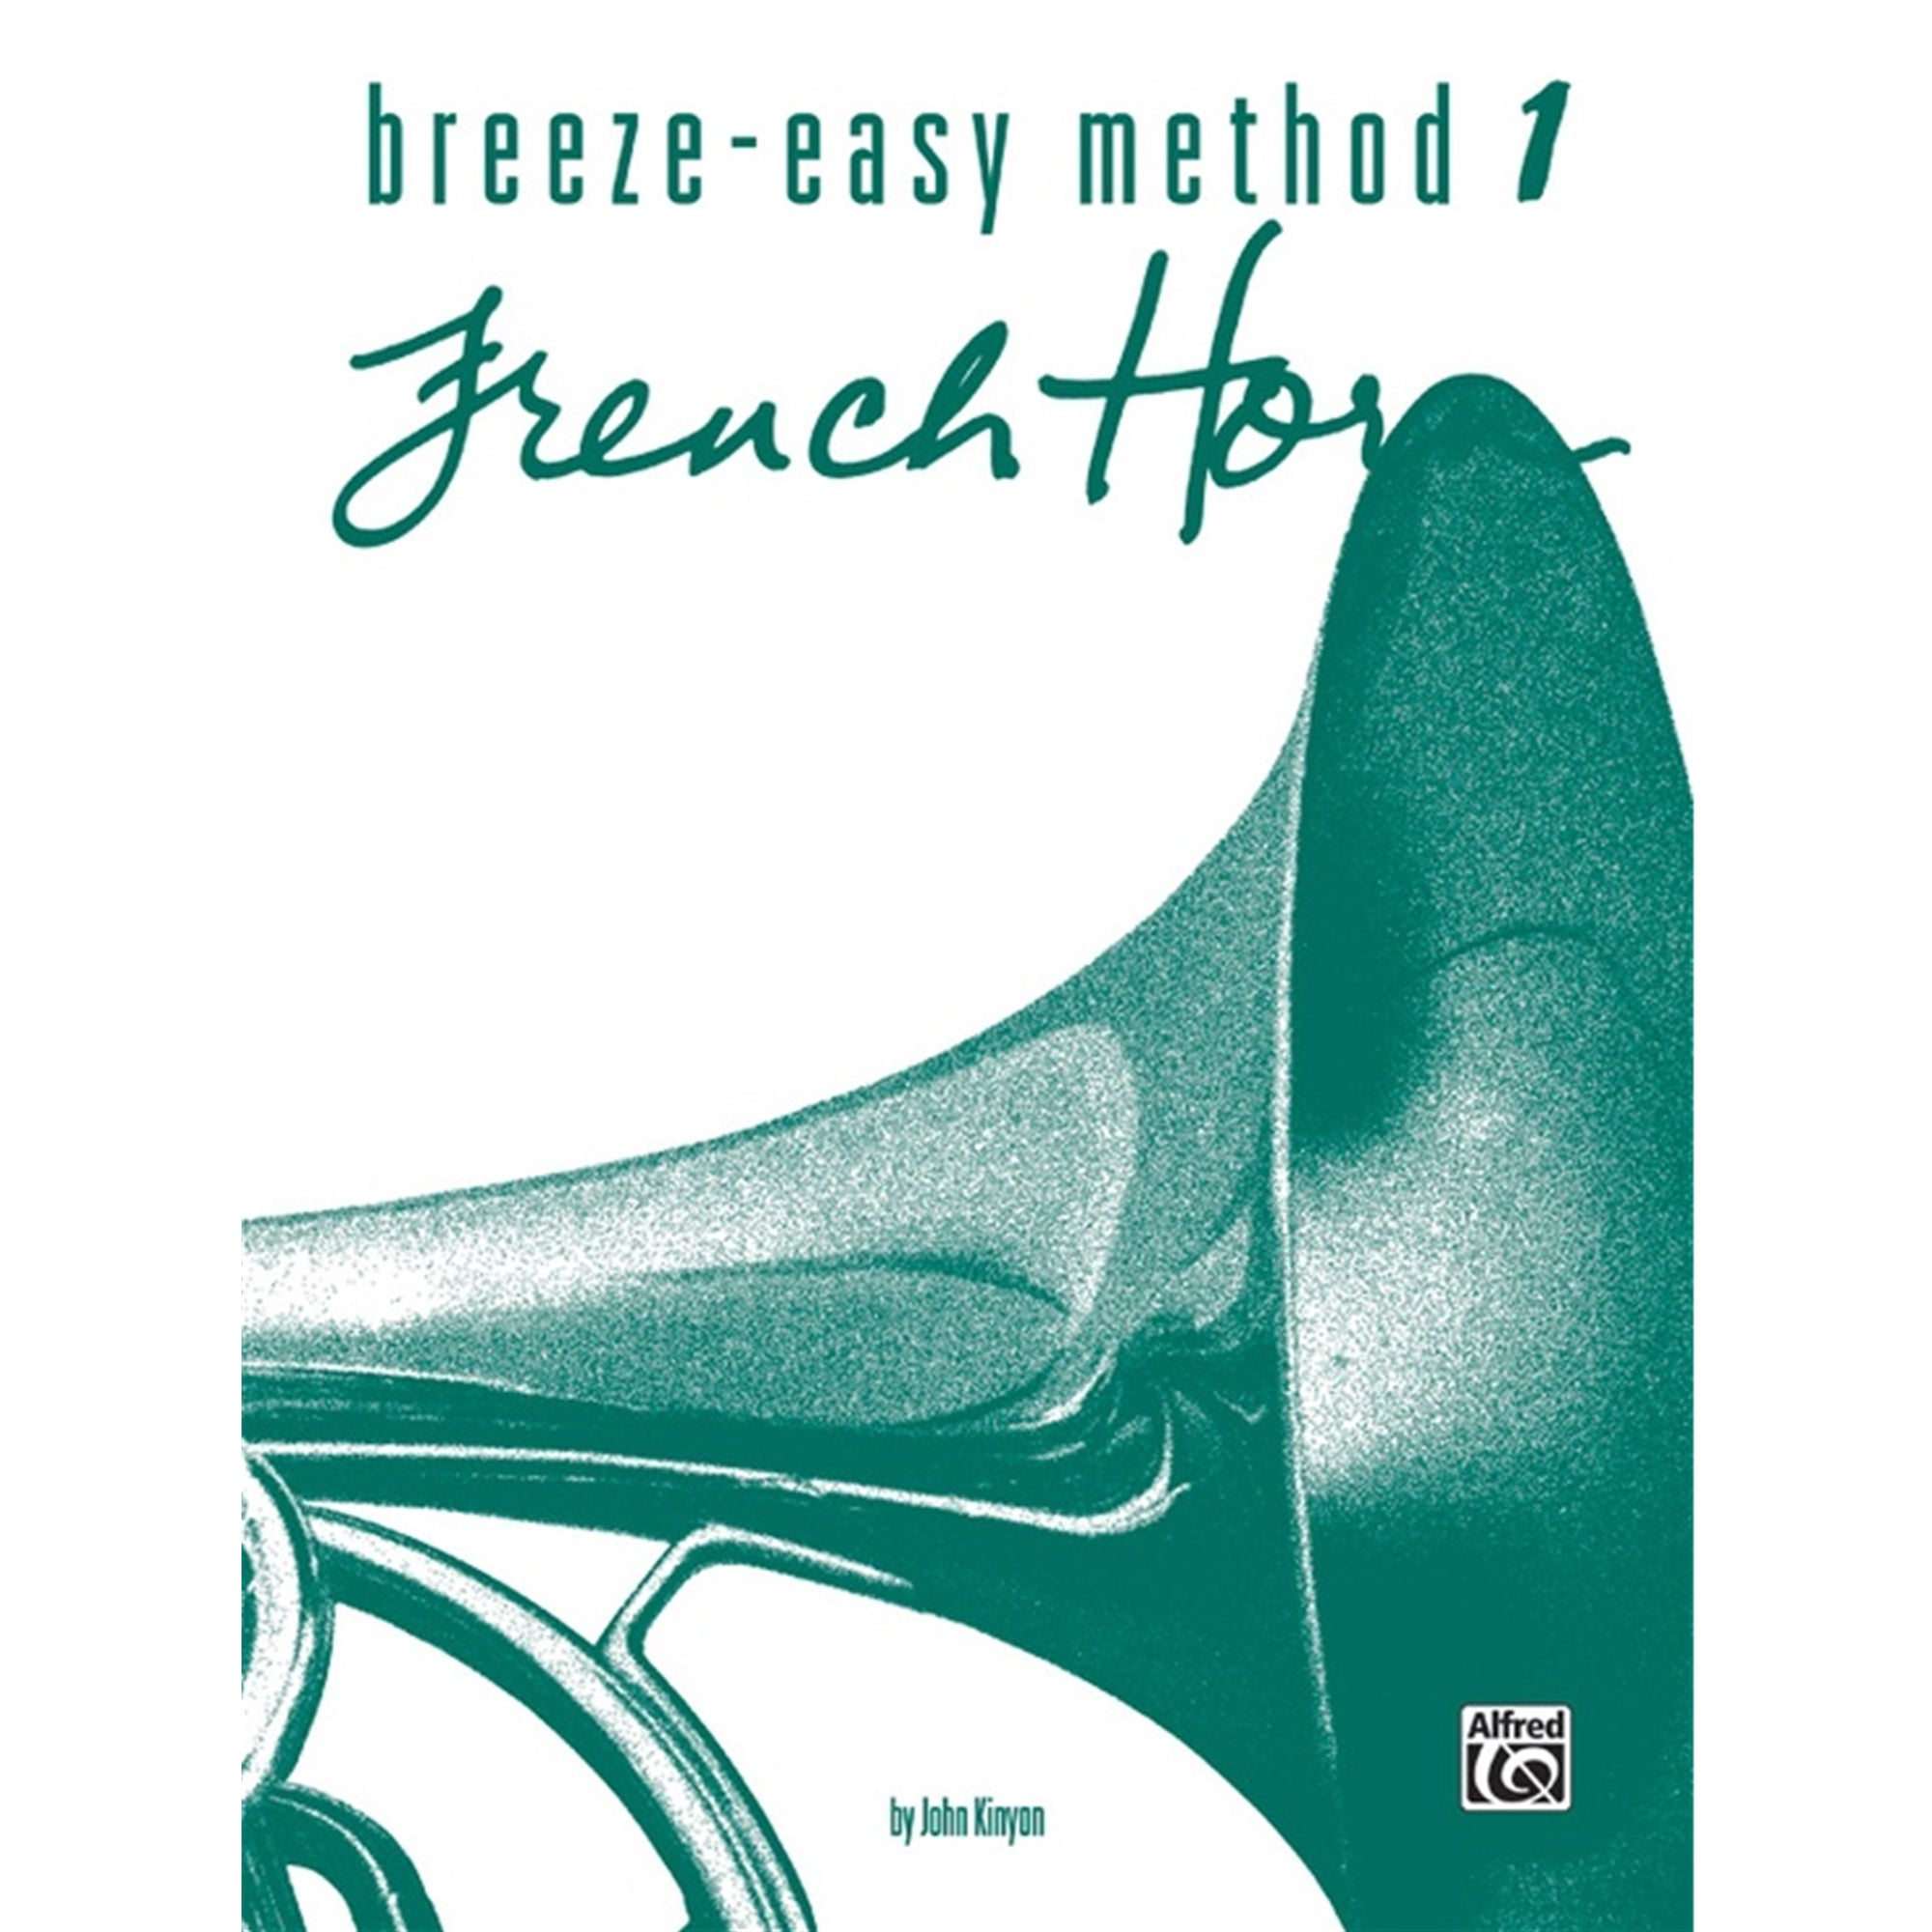 ALFRED 00BE0009 Breeze-Easy Method for French Horn, Book I